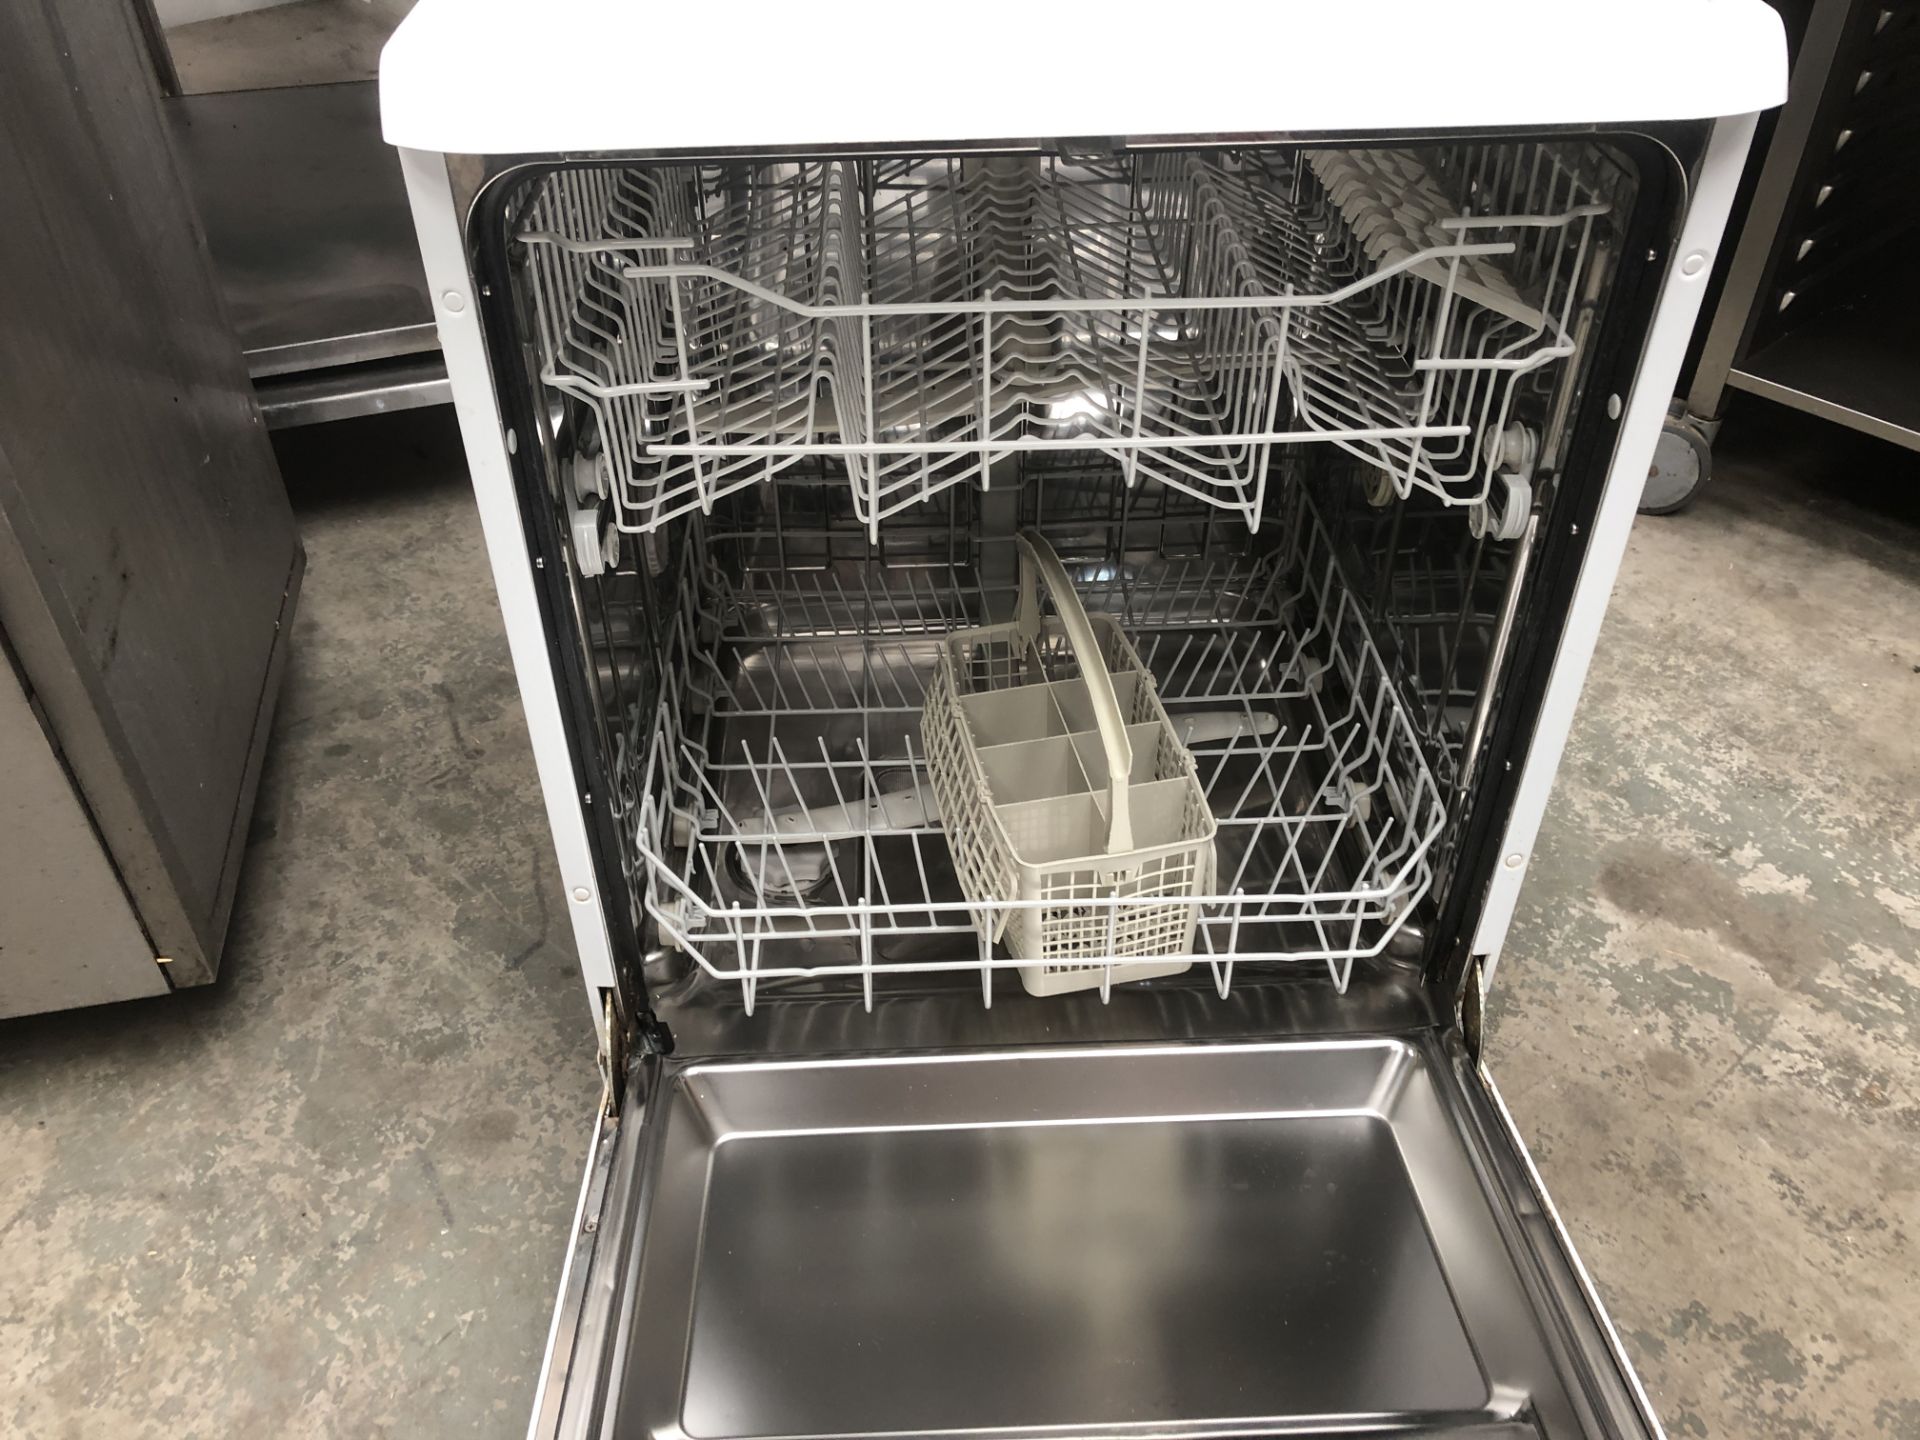 Domestic Dishwasher in Good Condition - Image 2 of 2